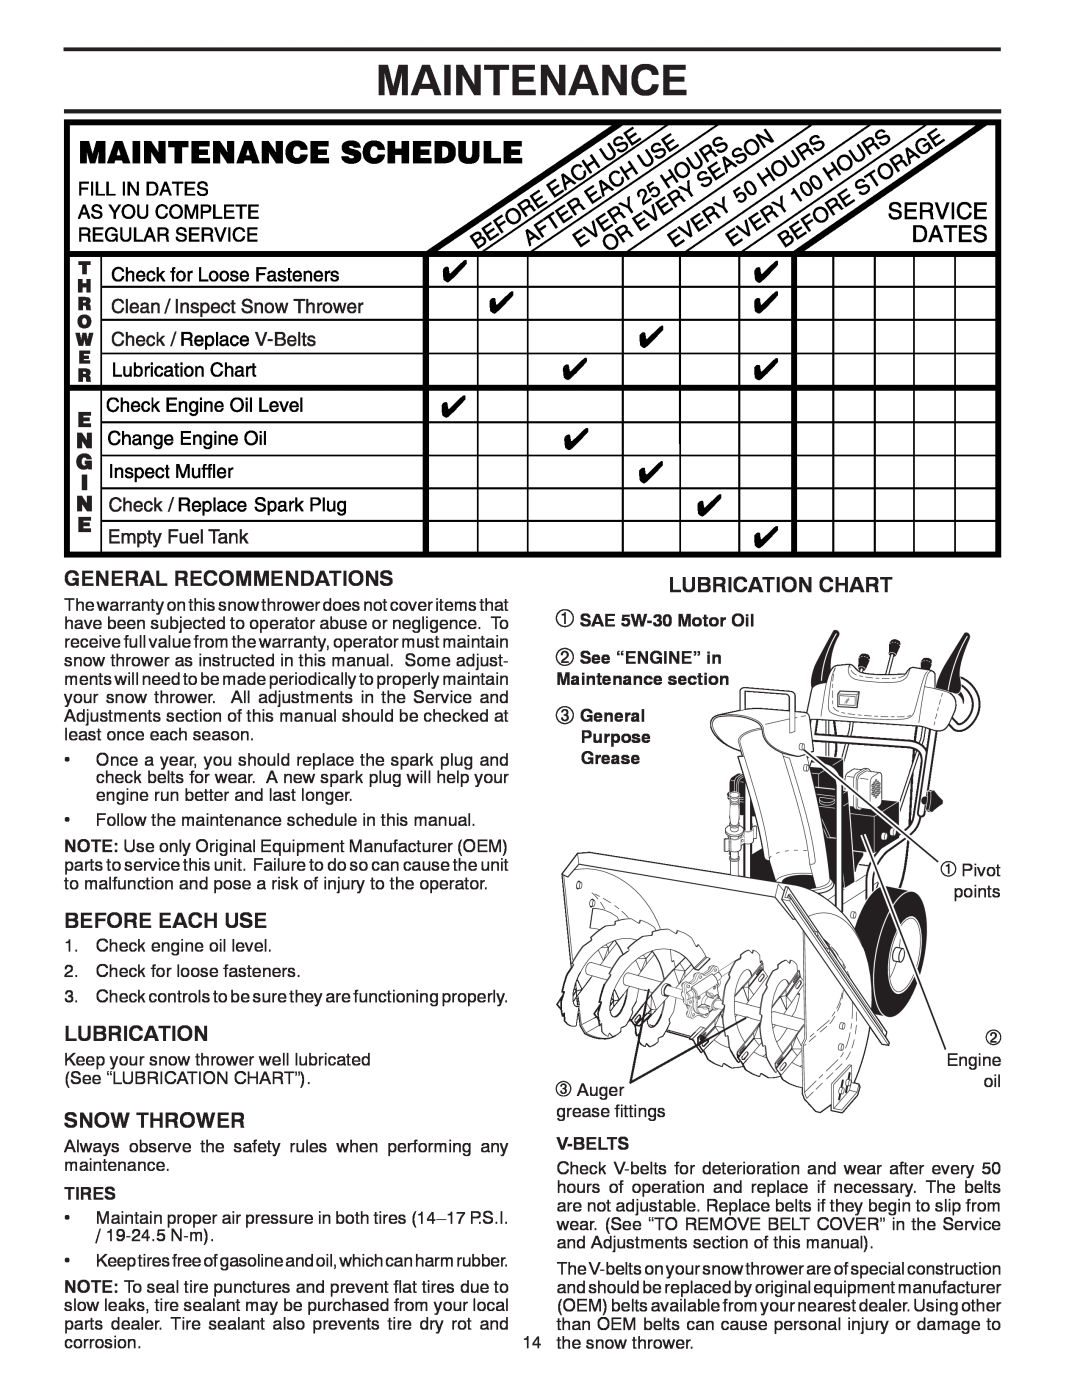 Poulan PP11530ES Maintenance, General Recommendations, Before Each Use, Snow Thrower, Lubrication Chart, Tires 